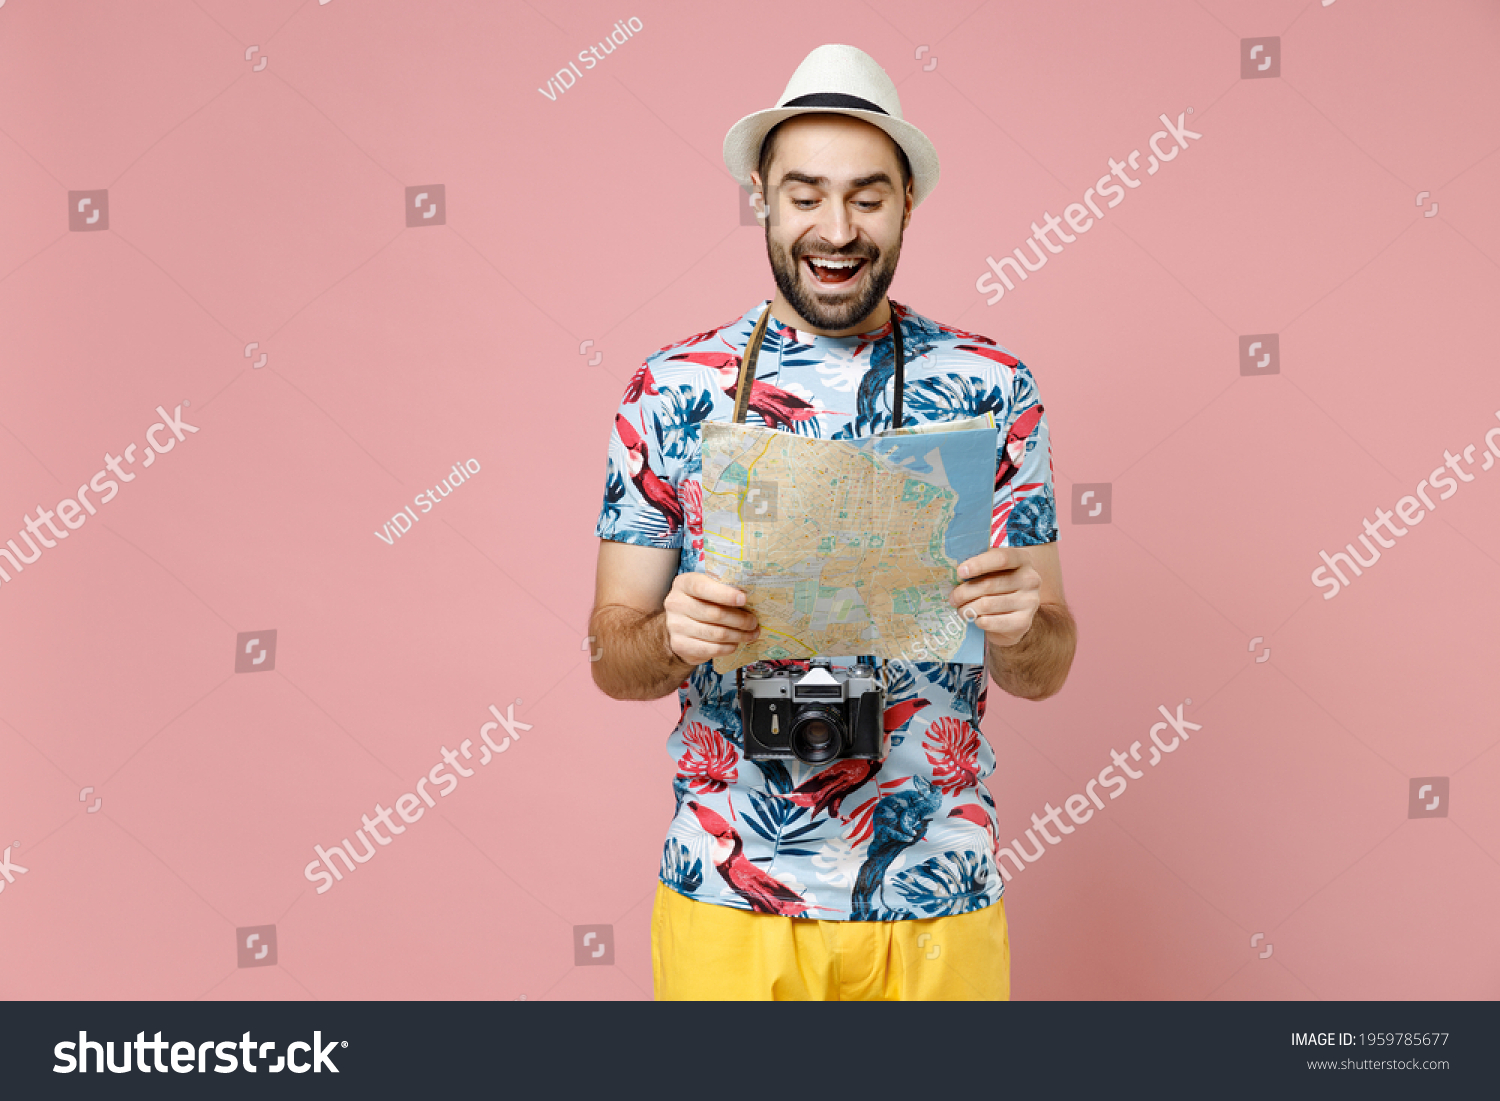 328,724 Man With Map Images, Stock Photos & Vectors | Shutterstock